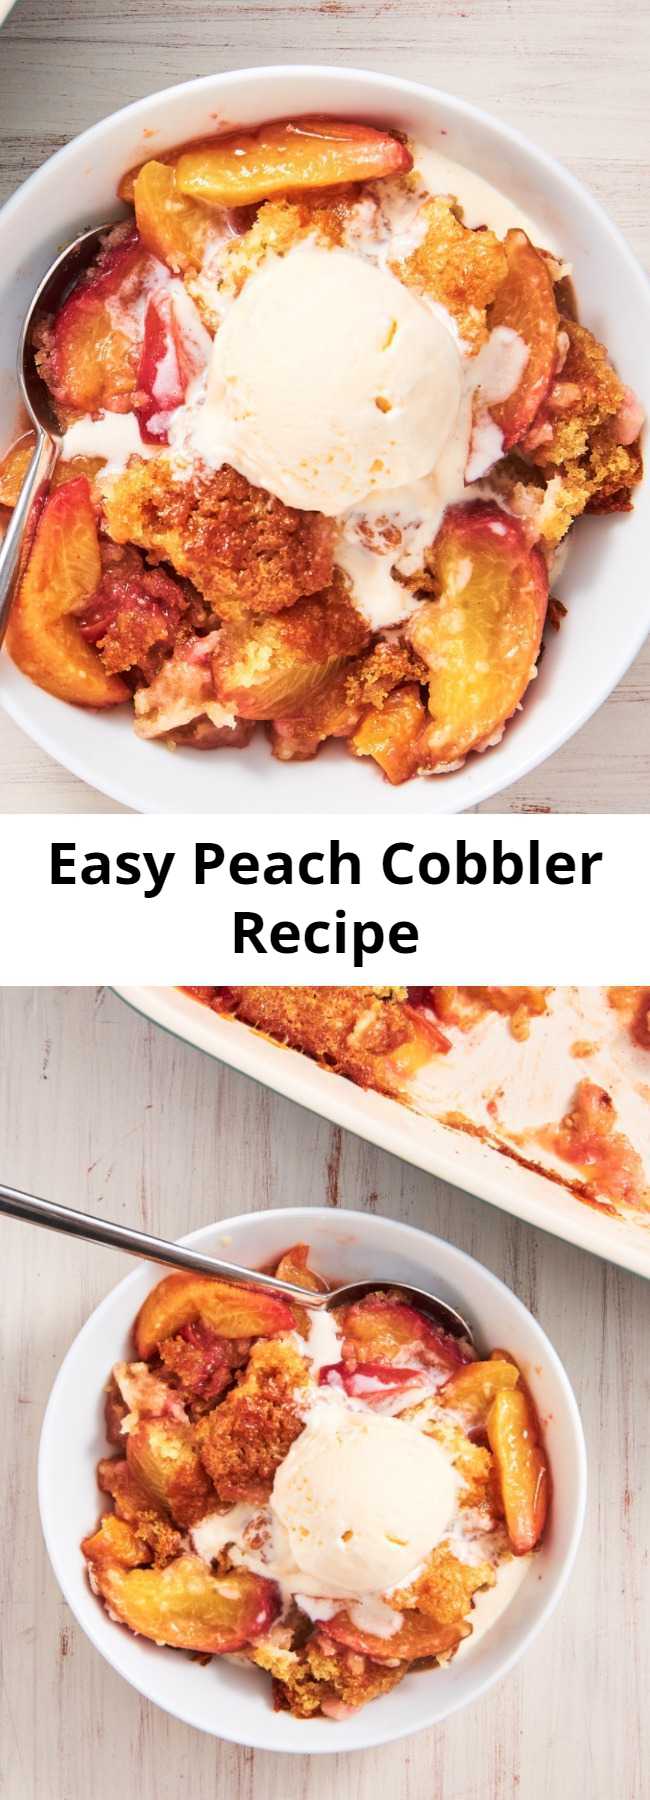 Easy Peach Cobbler Recipe - Peach Cobbler has an irresistible crackly-on-the-outside, pillowy-on-the-inside topping that will win everyone over this summer. And it's so easy to throw together for a last minute fourth celebration.